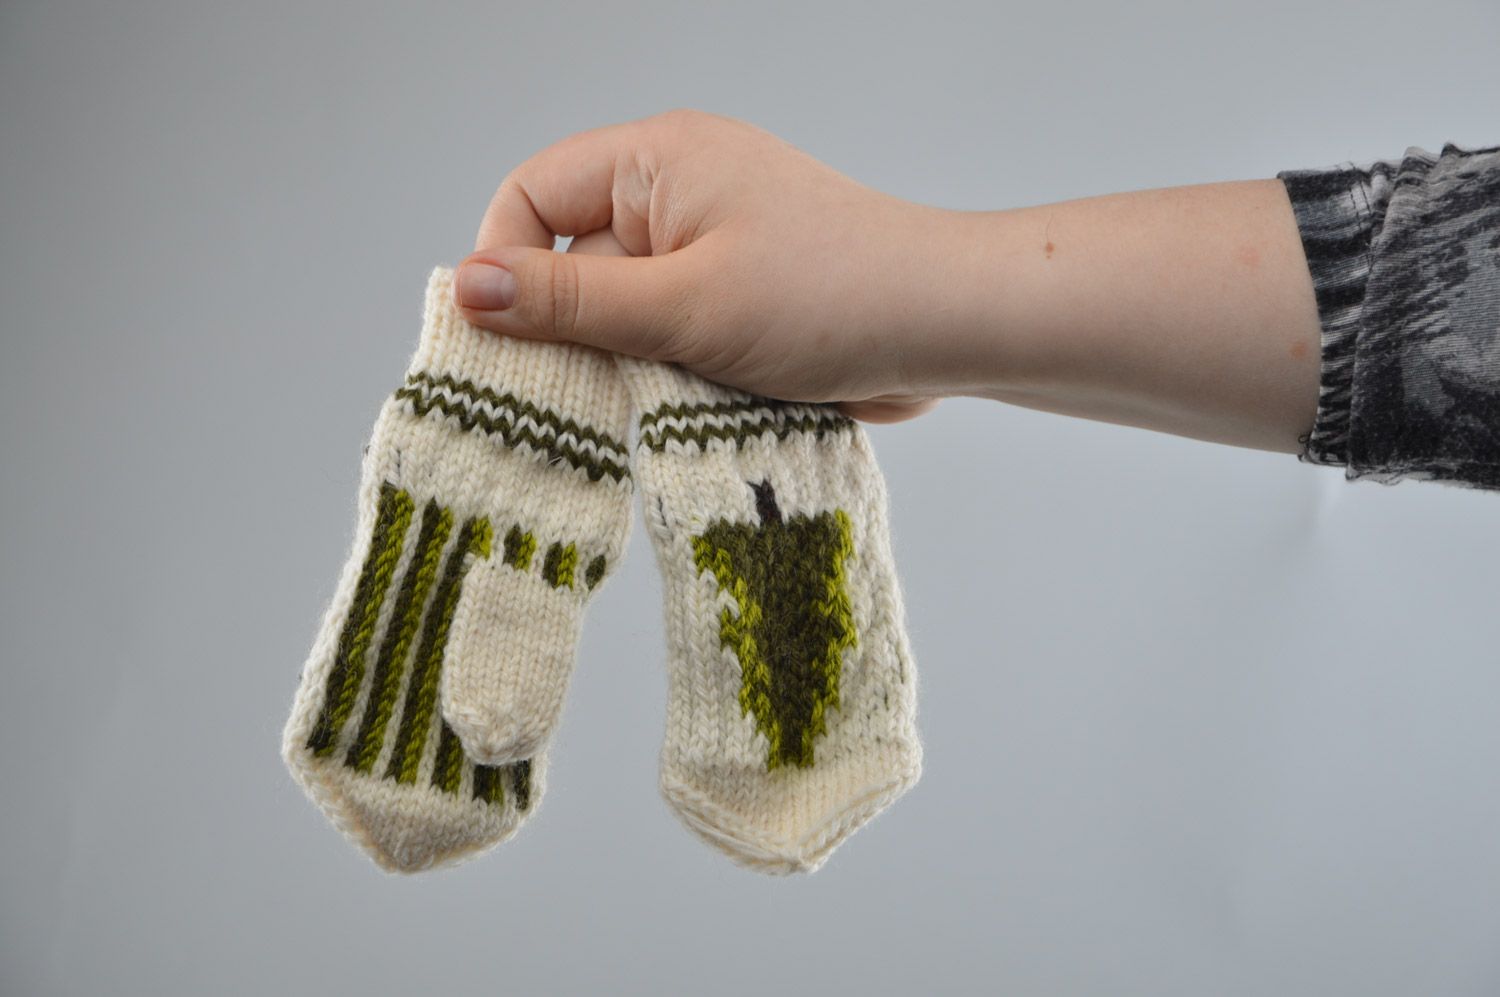 Handmade small mittens knitted of natural wool with fir trees Christmas present photo 3